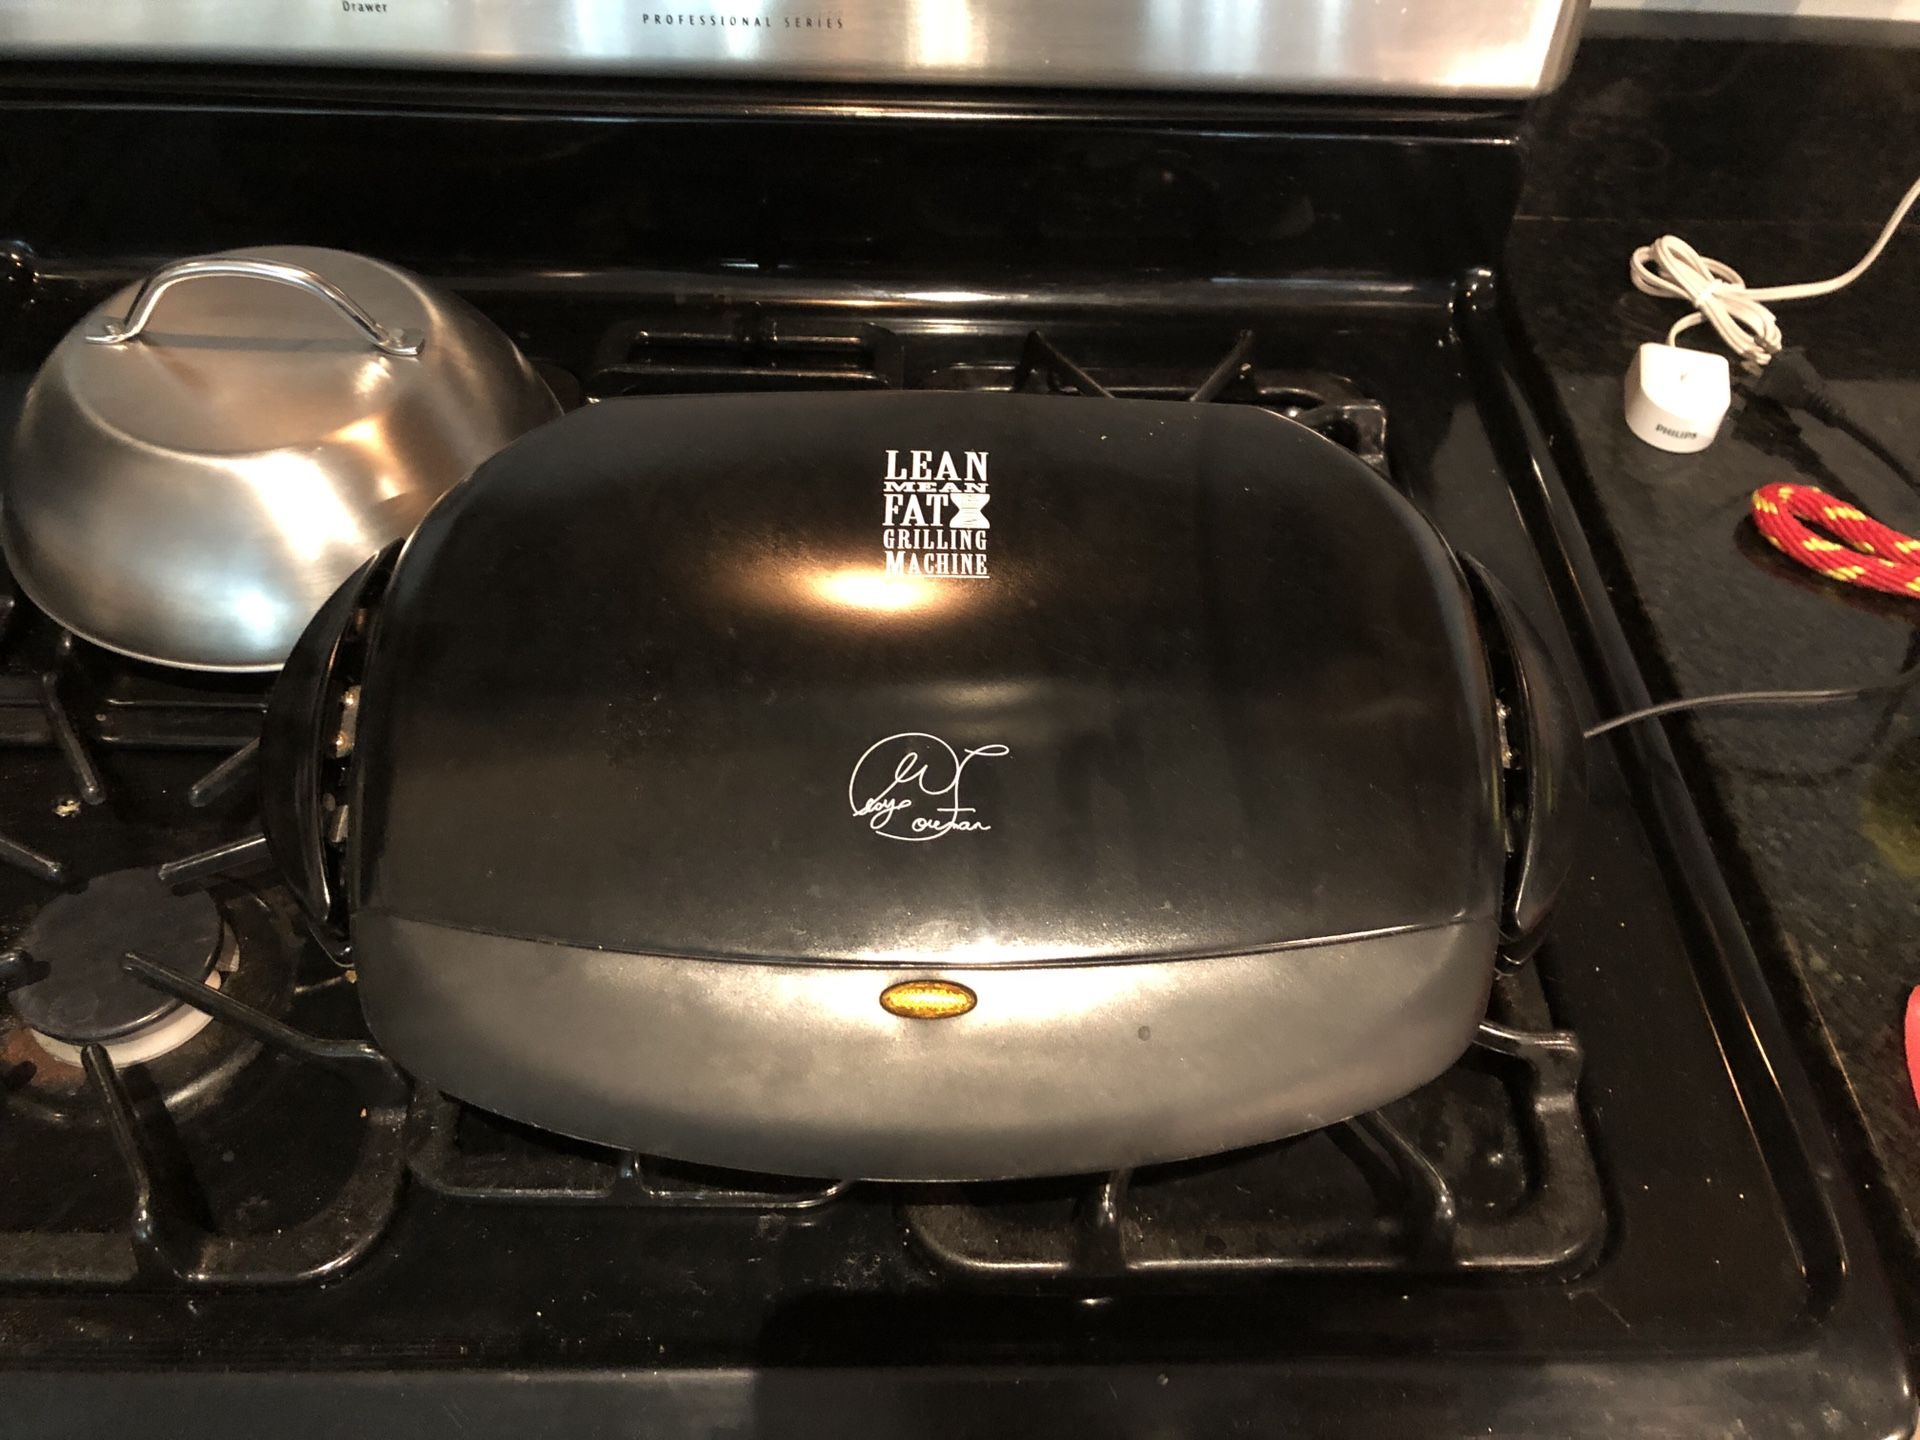 Used George Foreman grill